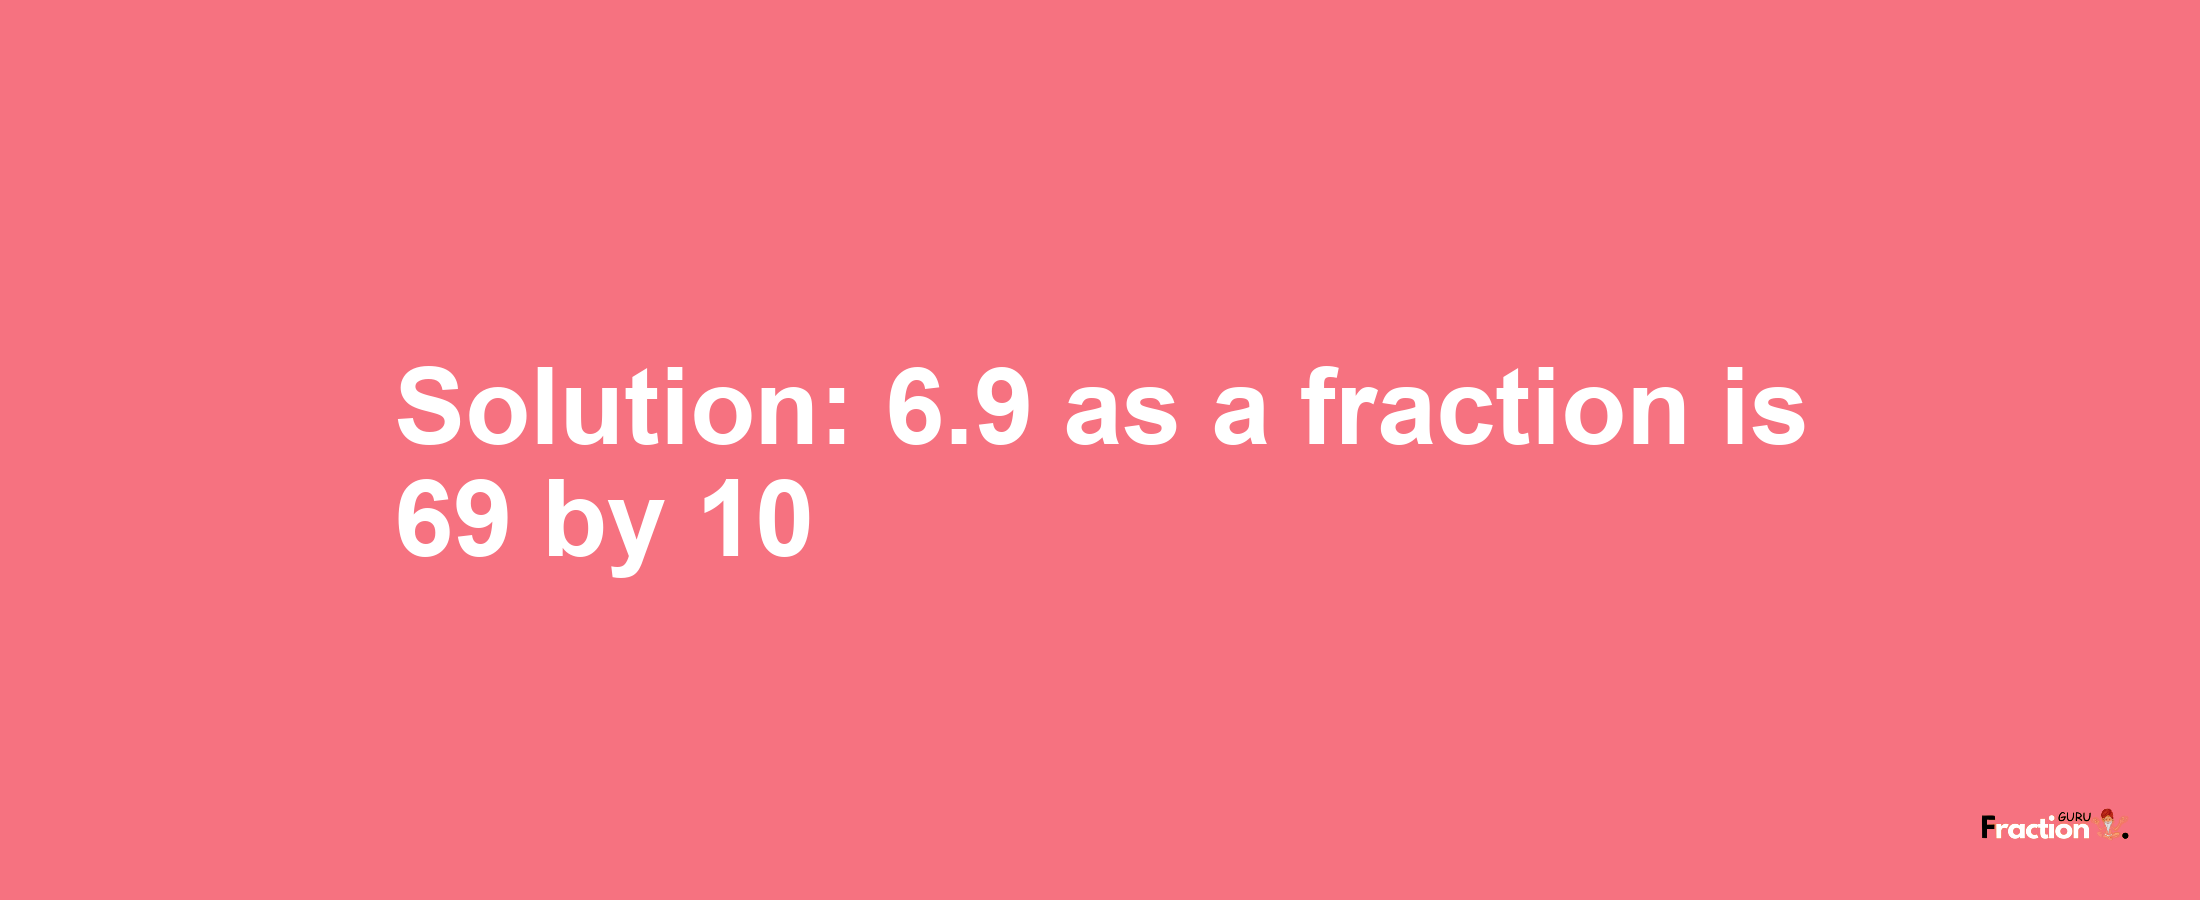 Solution:6.9 as a fraction is 69/10